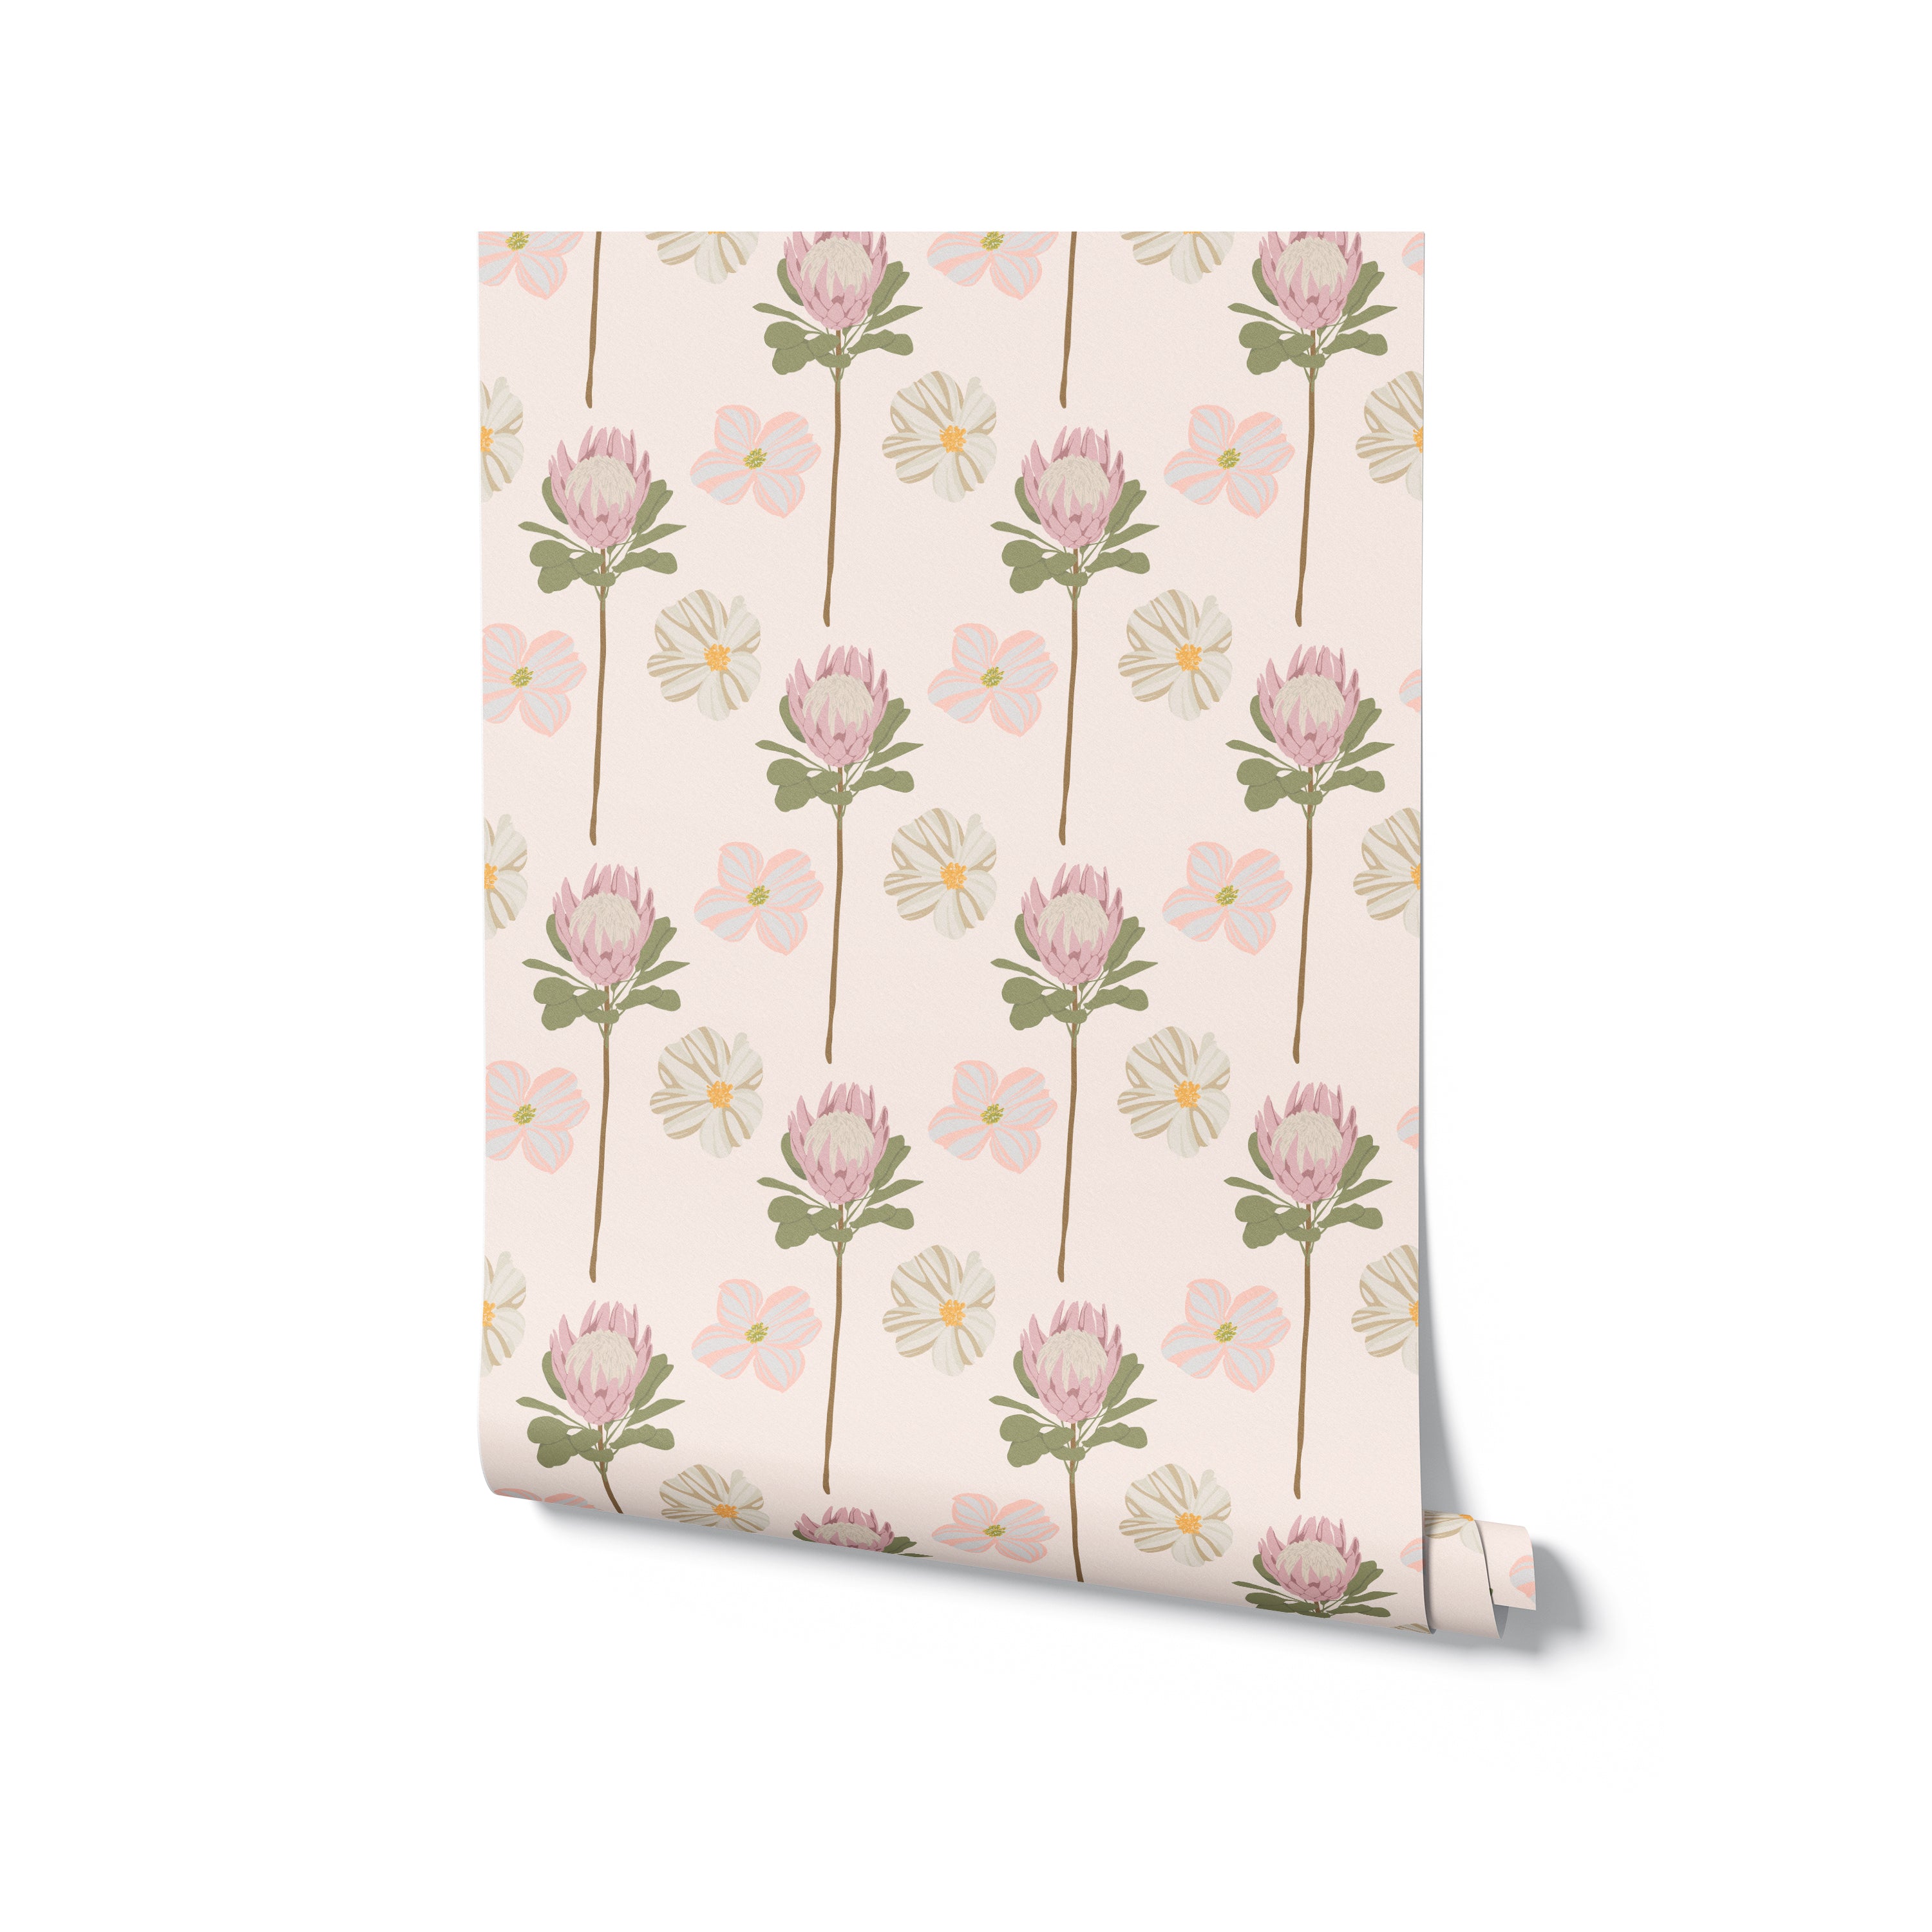 Roll of 'Retro Pastel Flower Wallpaper' illustrating a delicate and graceful floral design with pink clover flowers and subtle pastel daisies on a light background, ideal for softening and enhancing the aesthetics of any living space